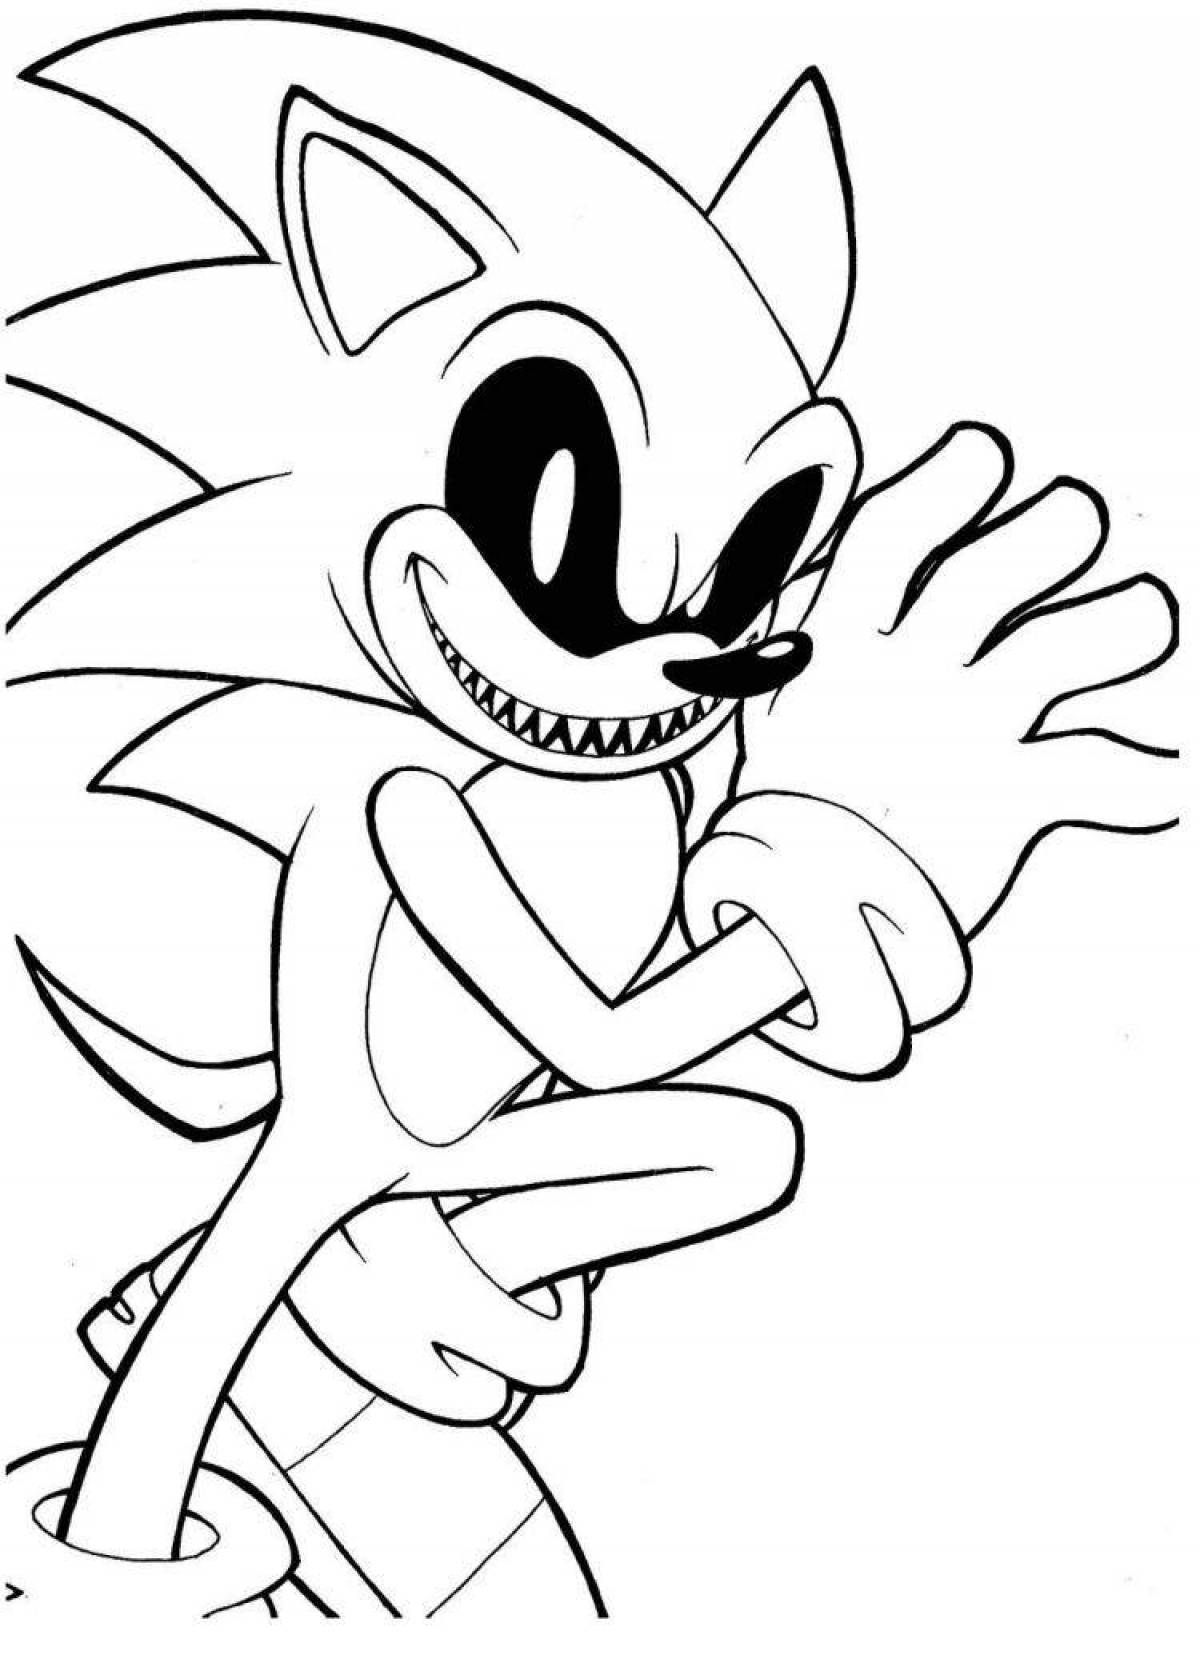 Black sonic shiny coloring book